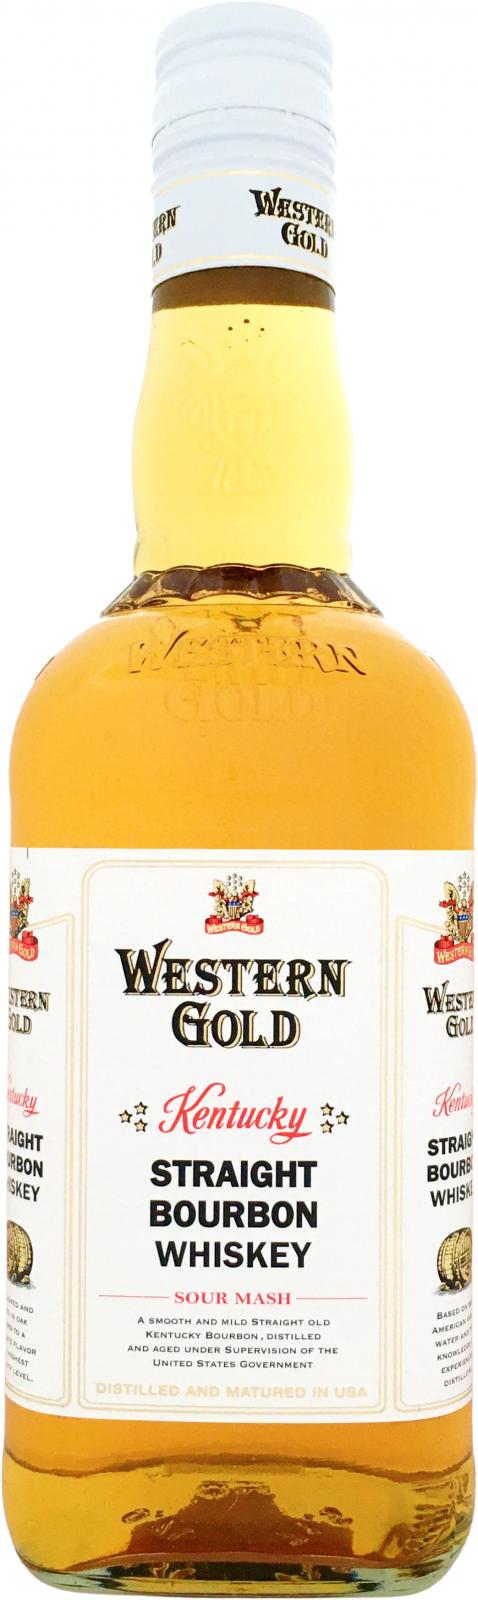 Western Gold Straight Old Kentucky and - Whiskey Bourbon - Whiskybase reviews Ratings